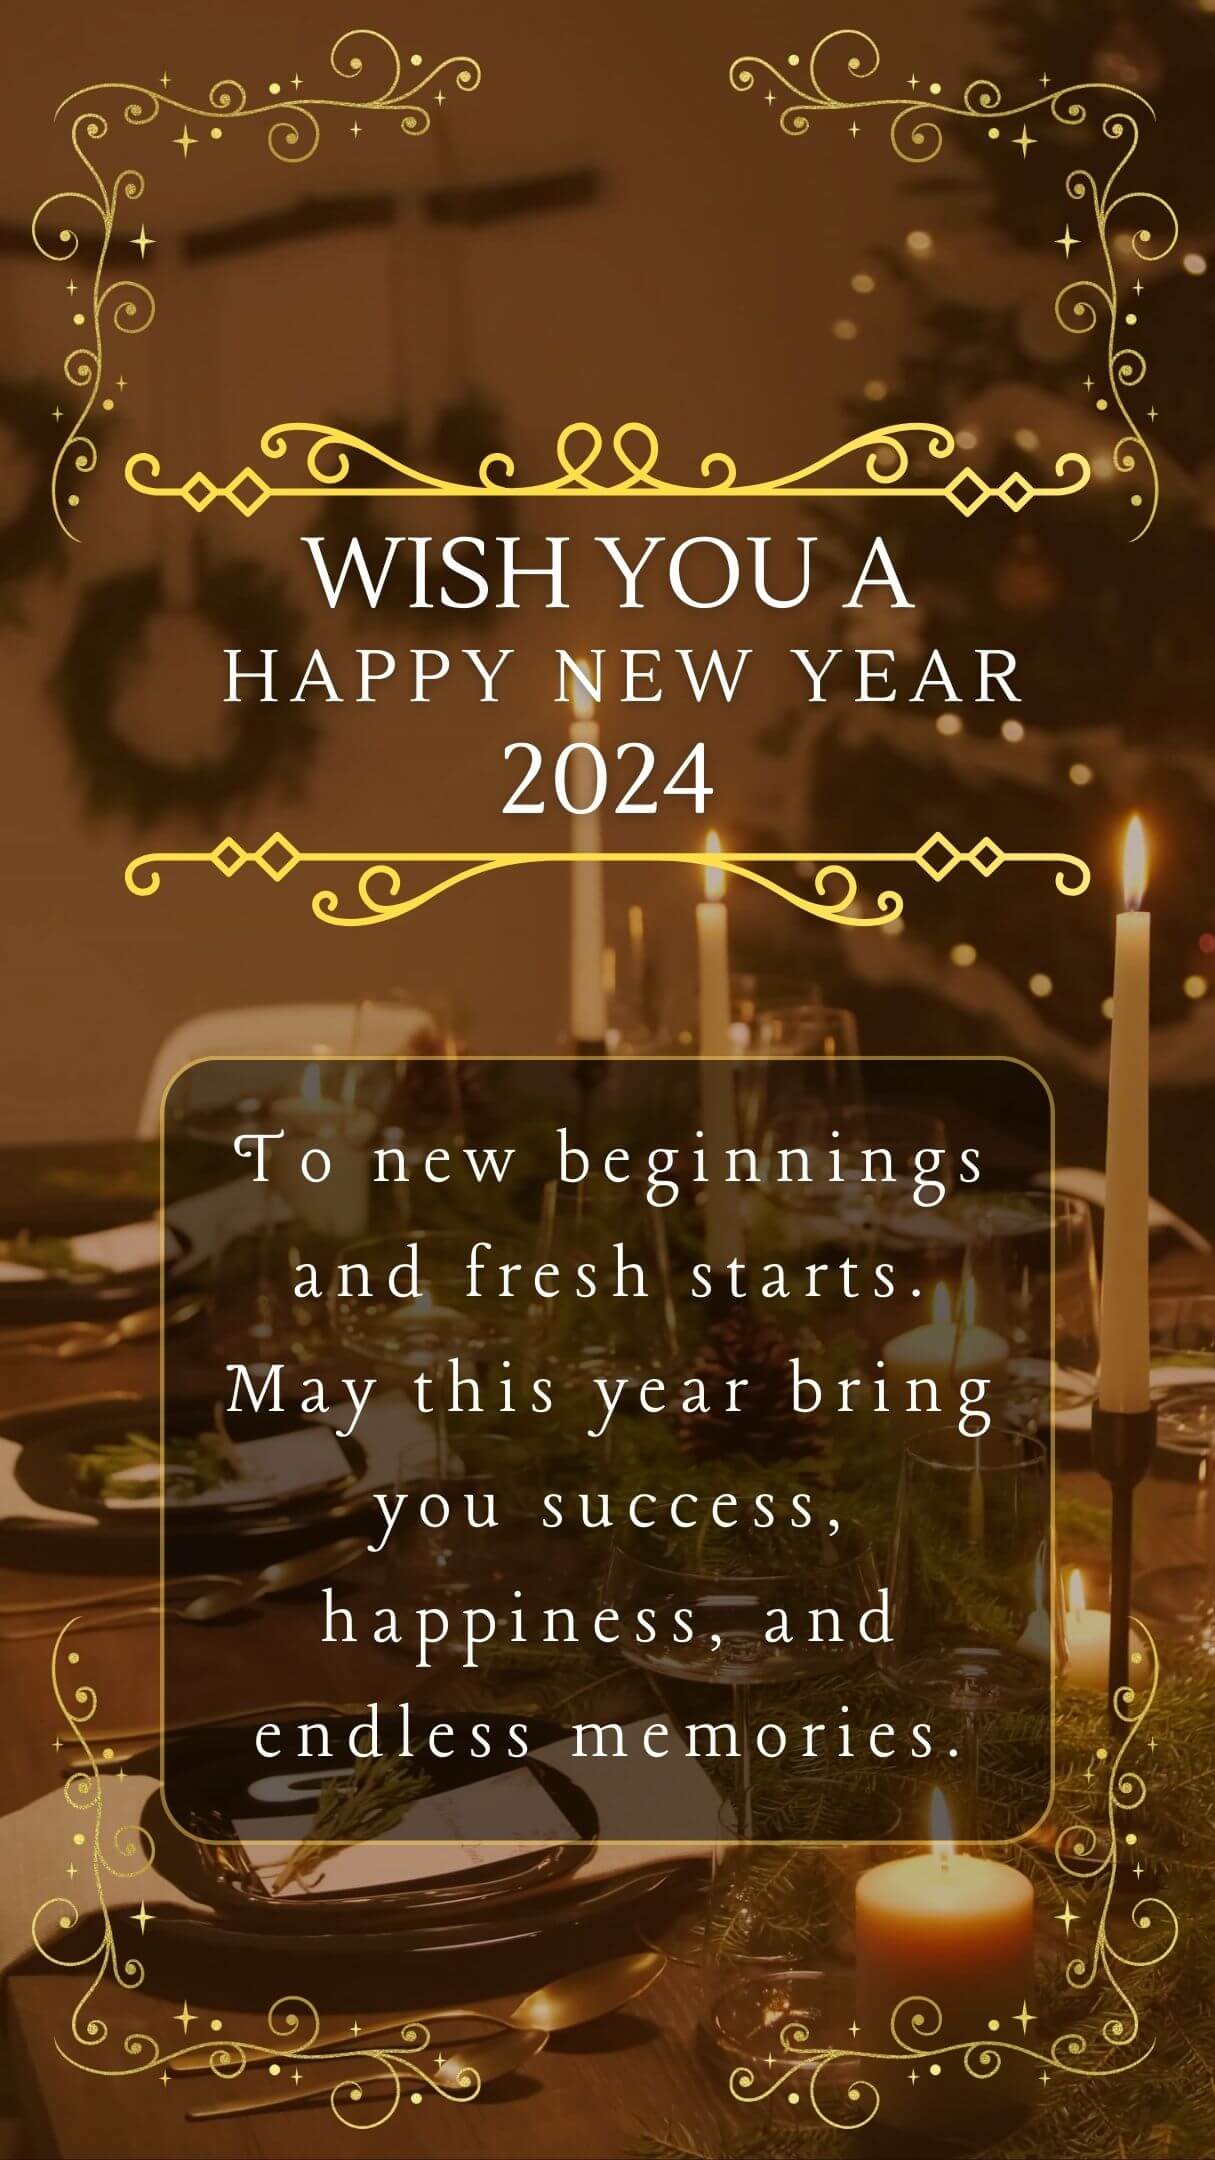 Happy New Year 2024 Captions And Facebook Statuses With Images